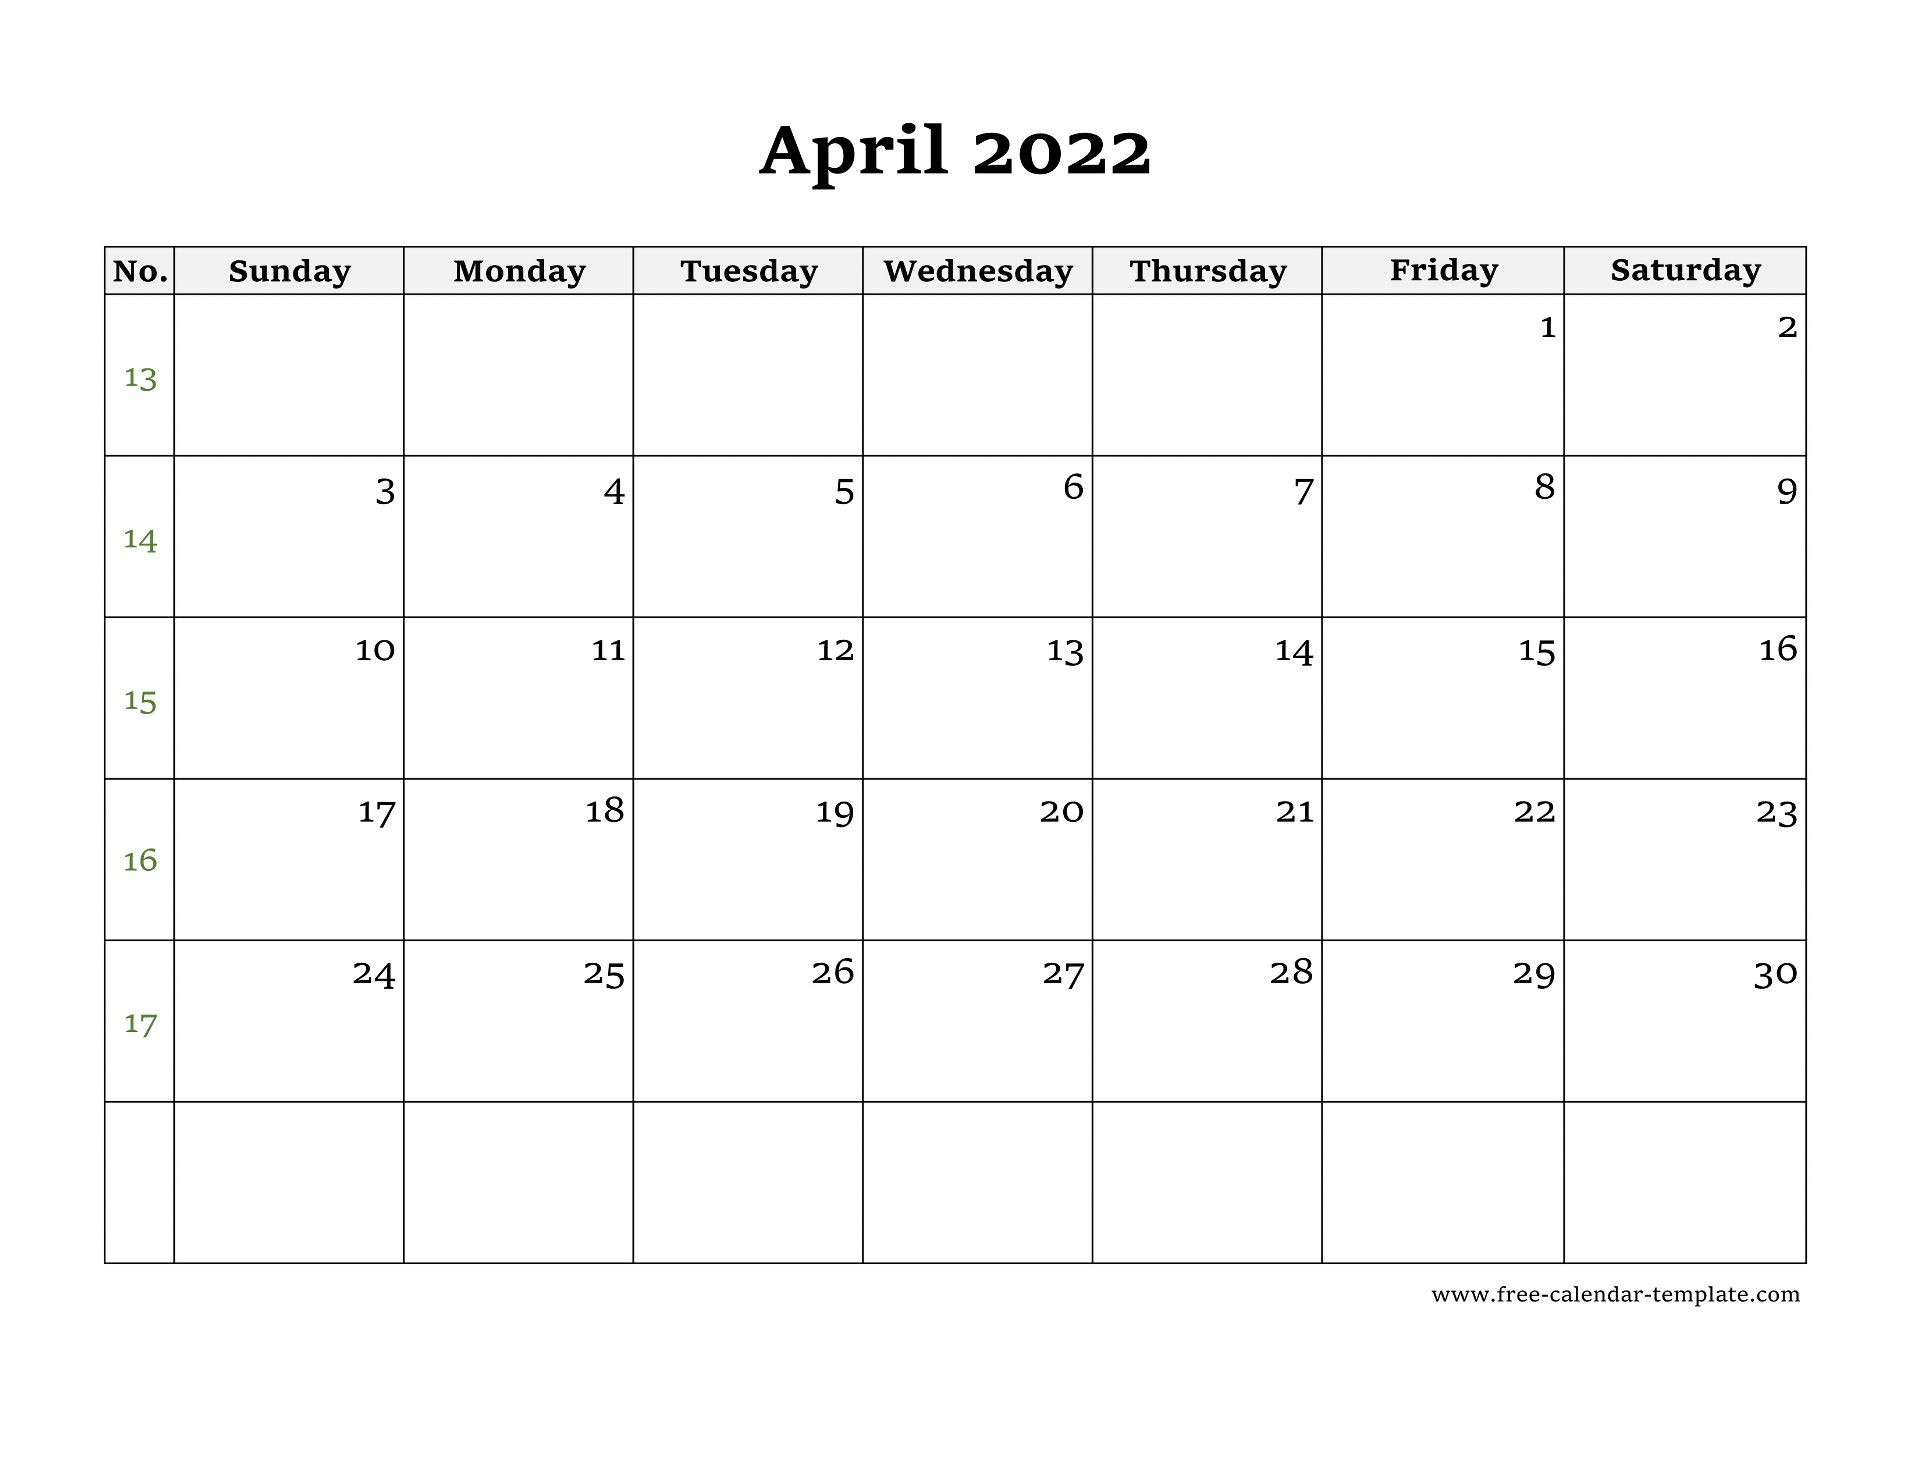 Simple April Calendar 2022 Large Box On Each Day For Notes  December 2022 To April 2022 Calendar